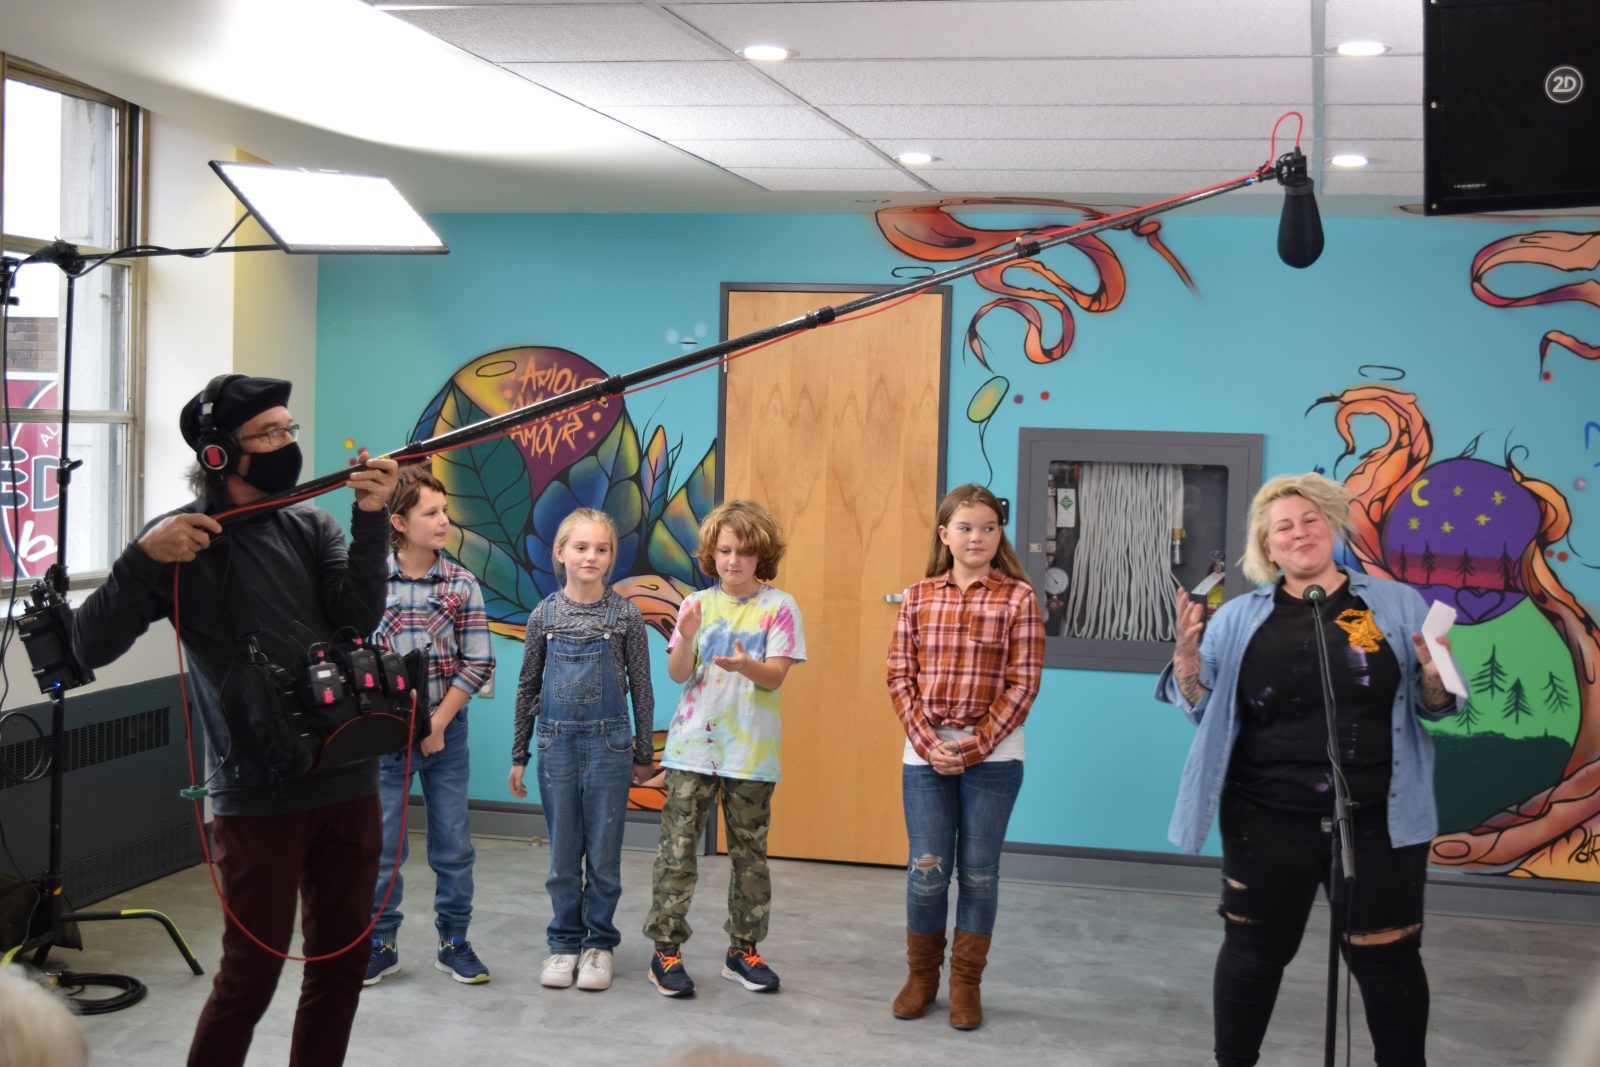 Franco-Ontarien children’s show films at Cornwall Library